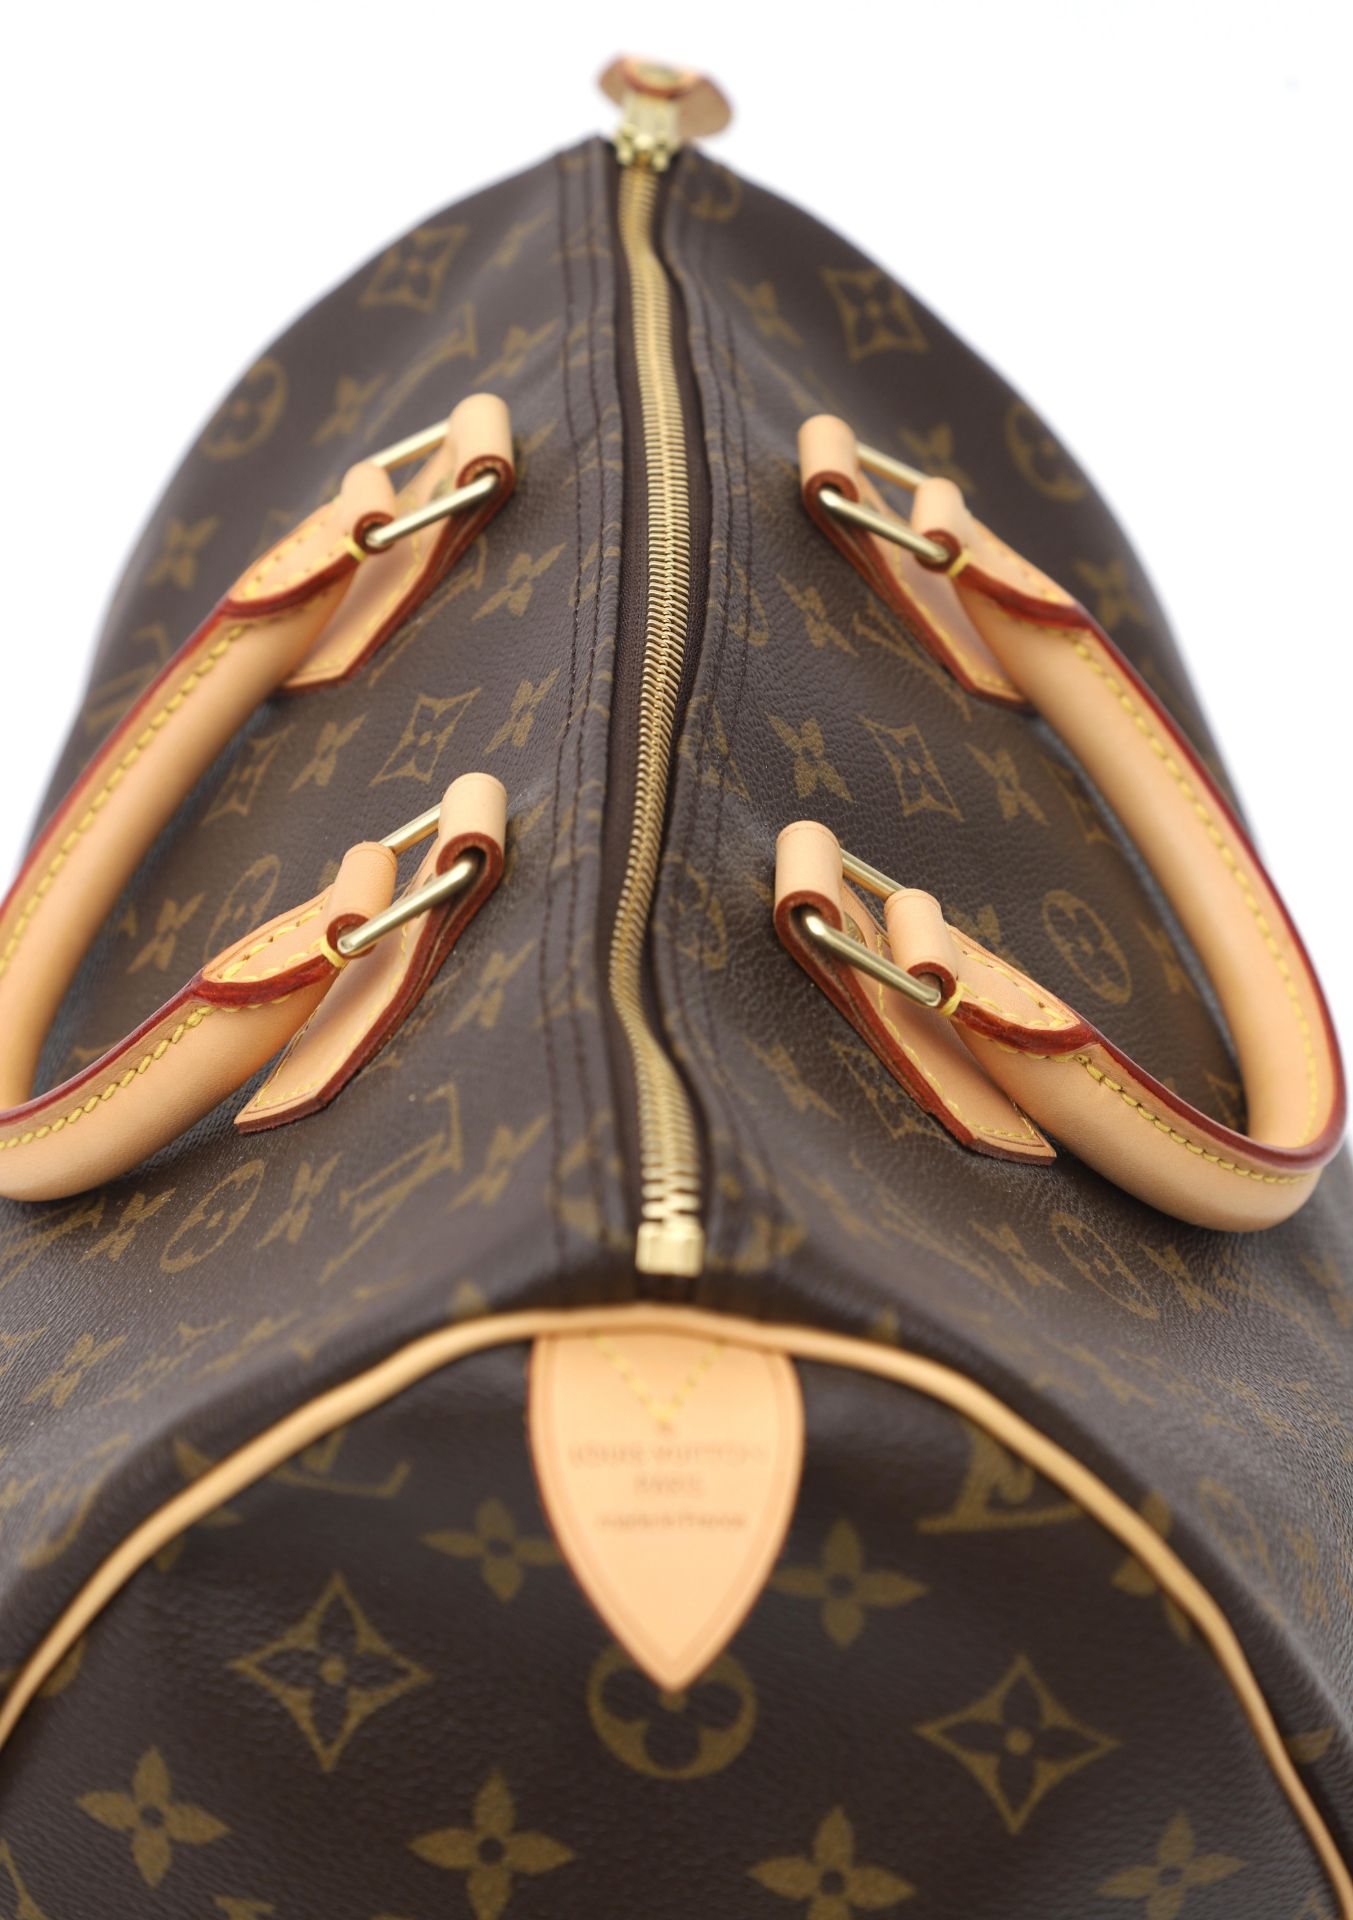 Vintage bag by Louis Vuitton model, Speedy 30 - Image 6 of 11